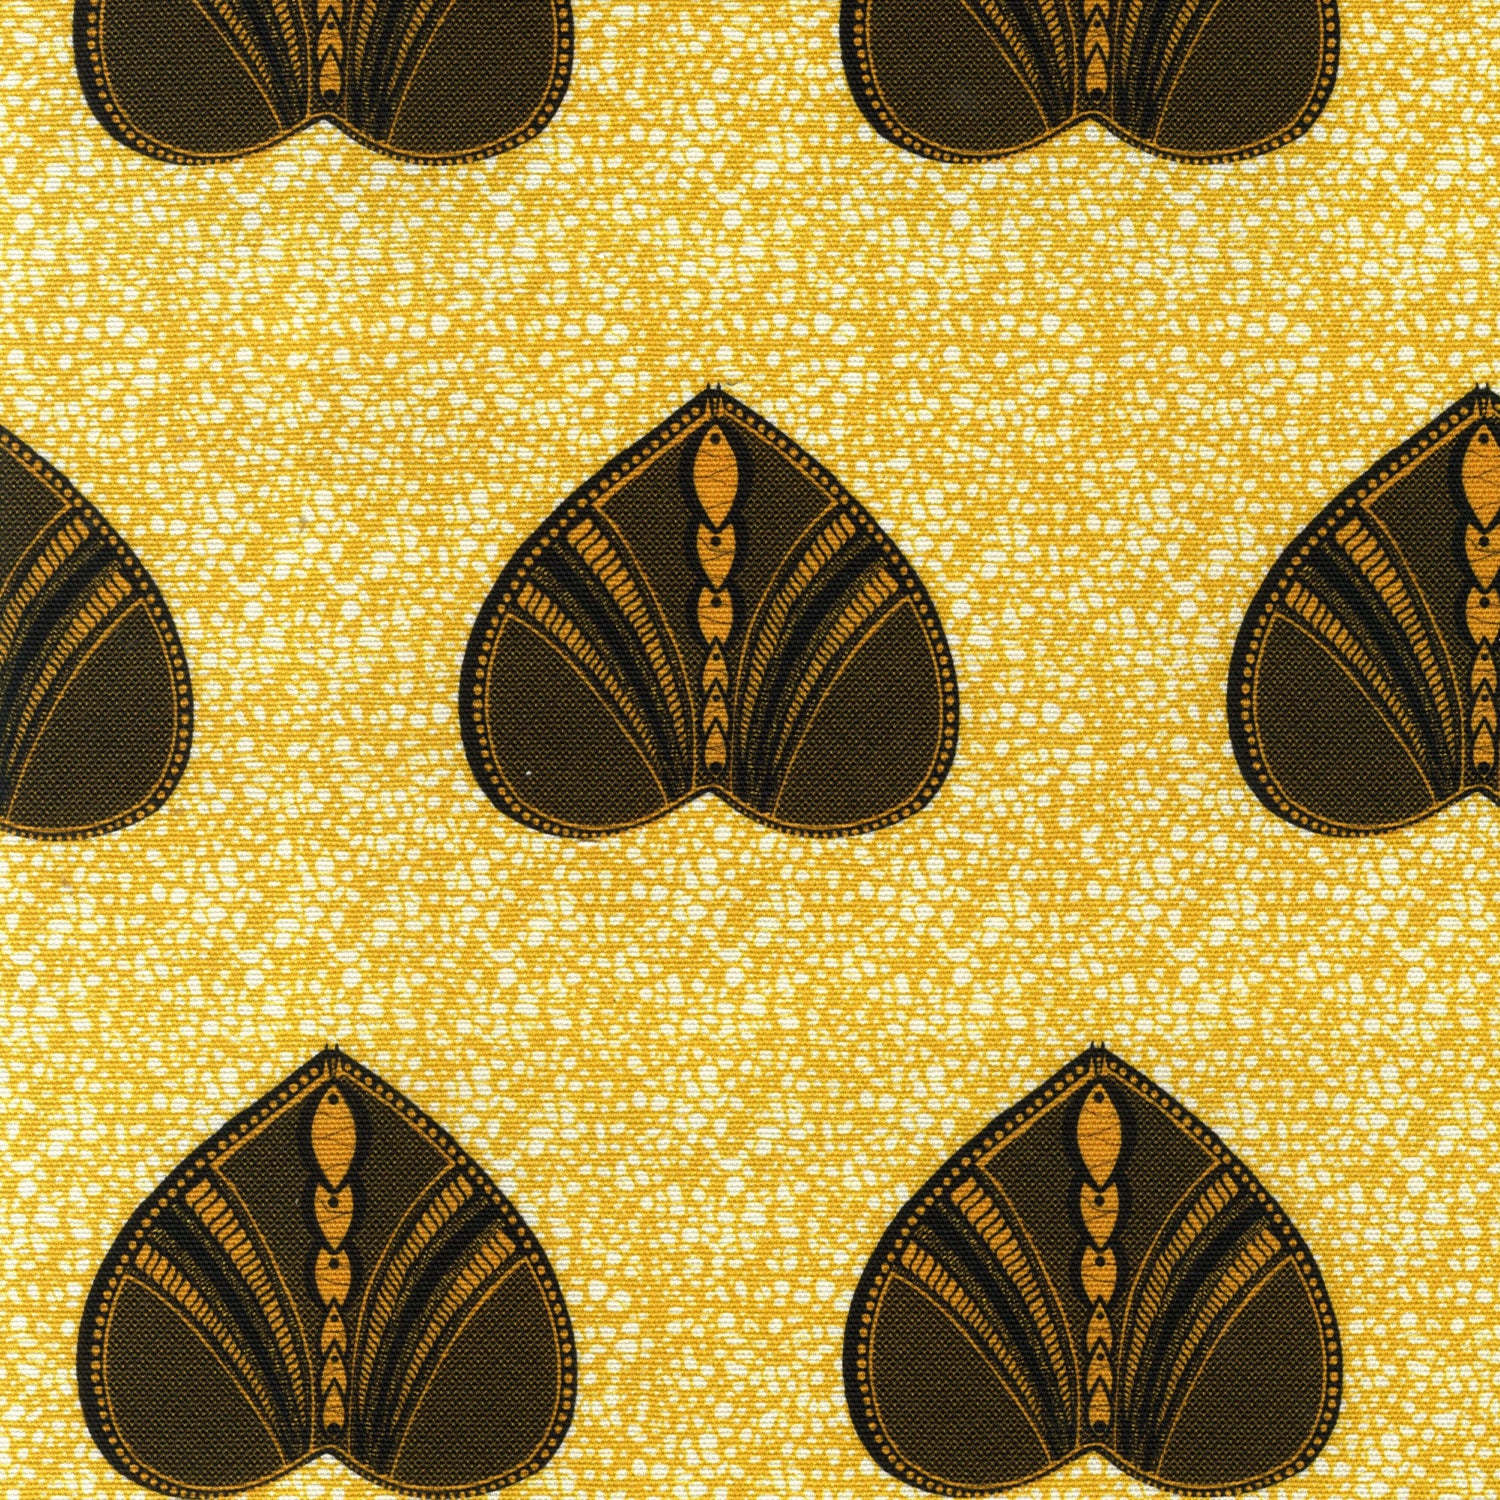 Detail of fabric in a geometric heart print in yellow and black on a yellow field.